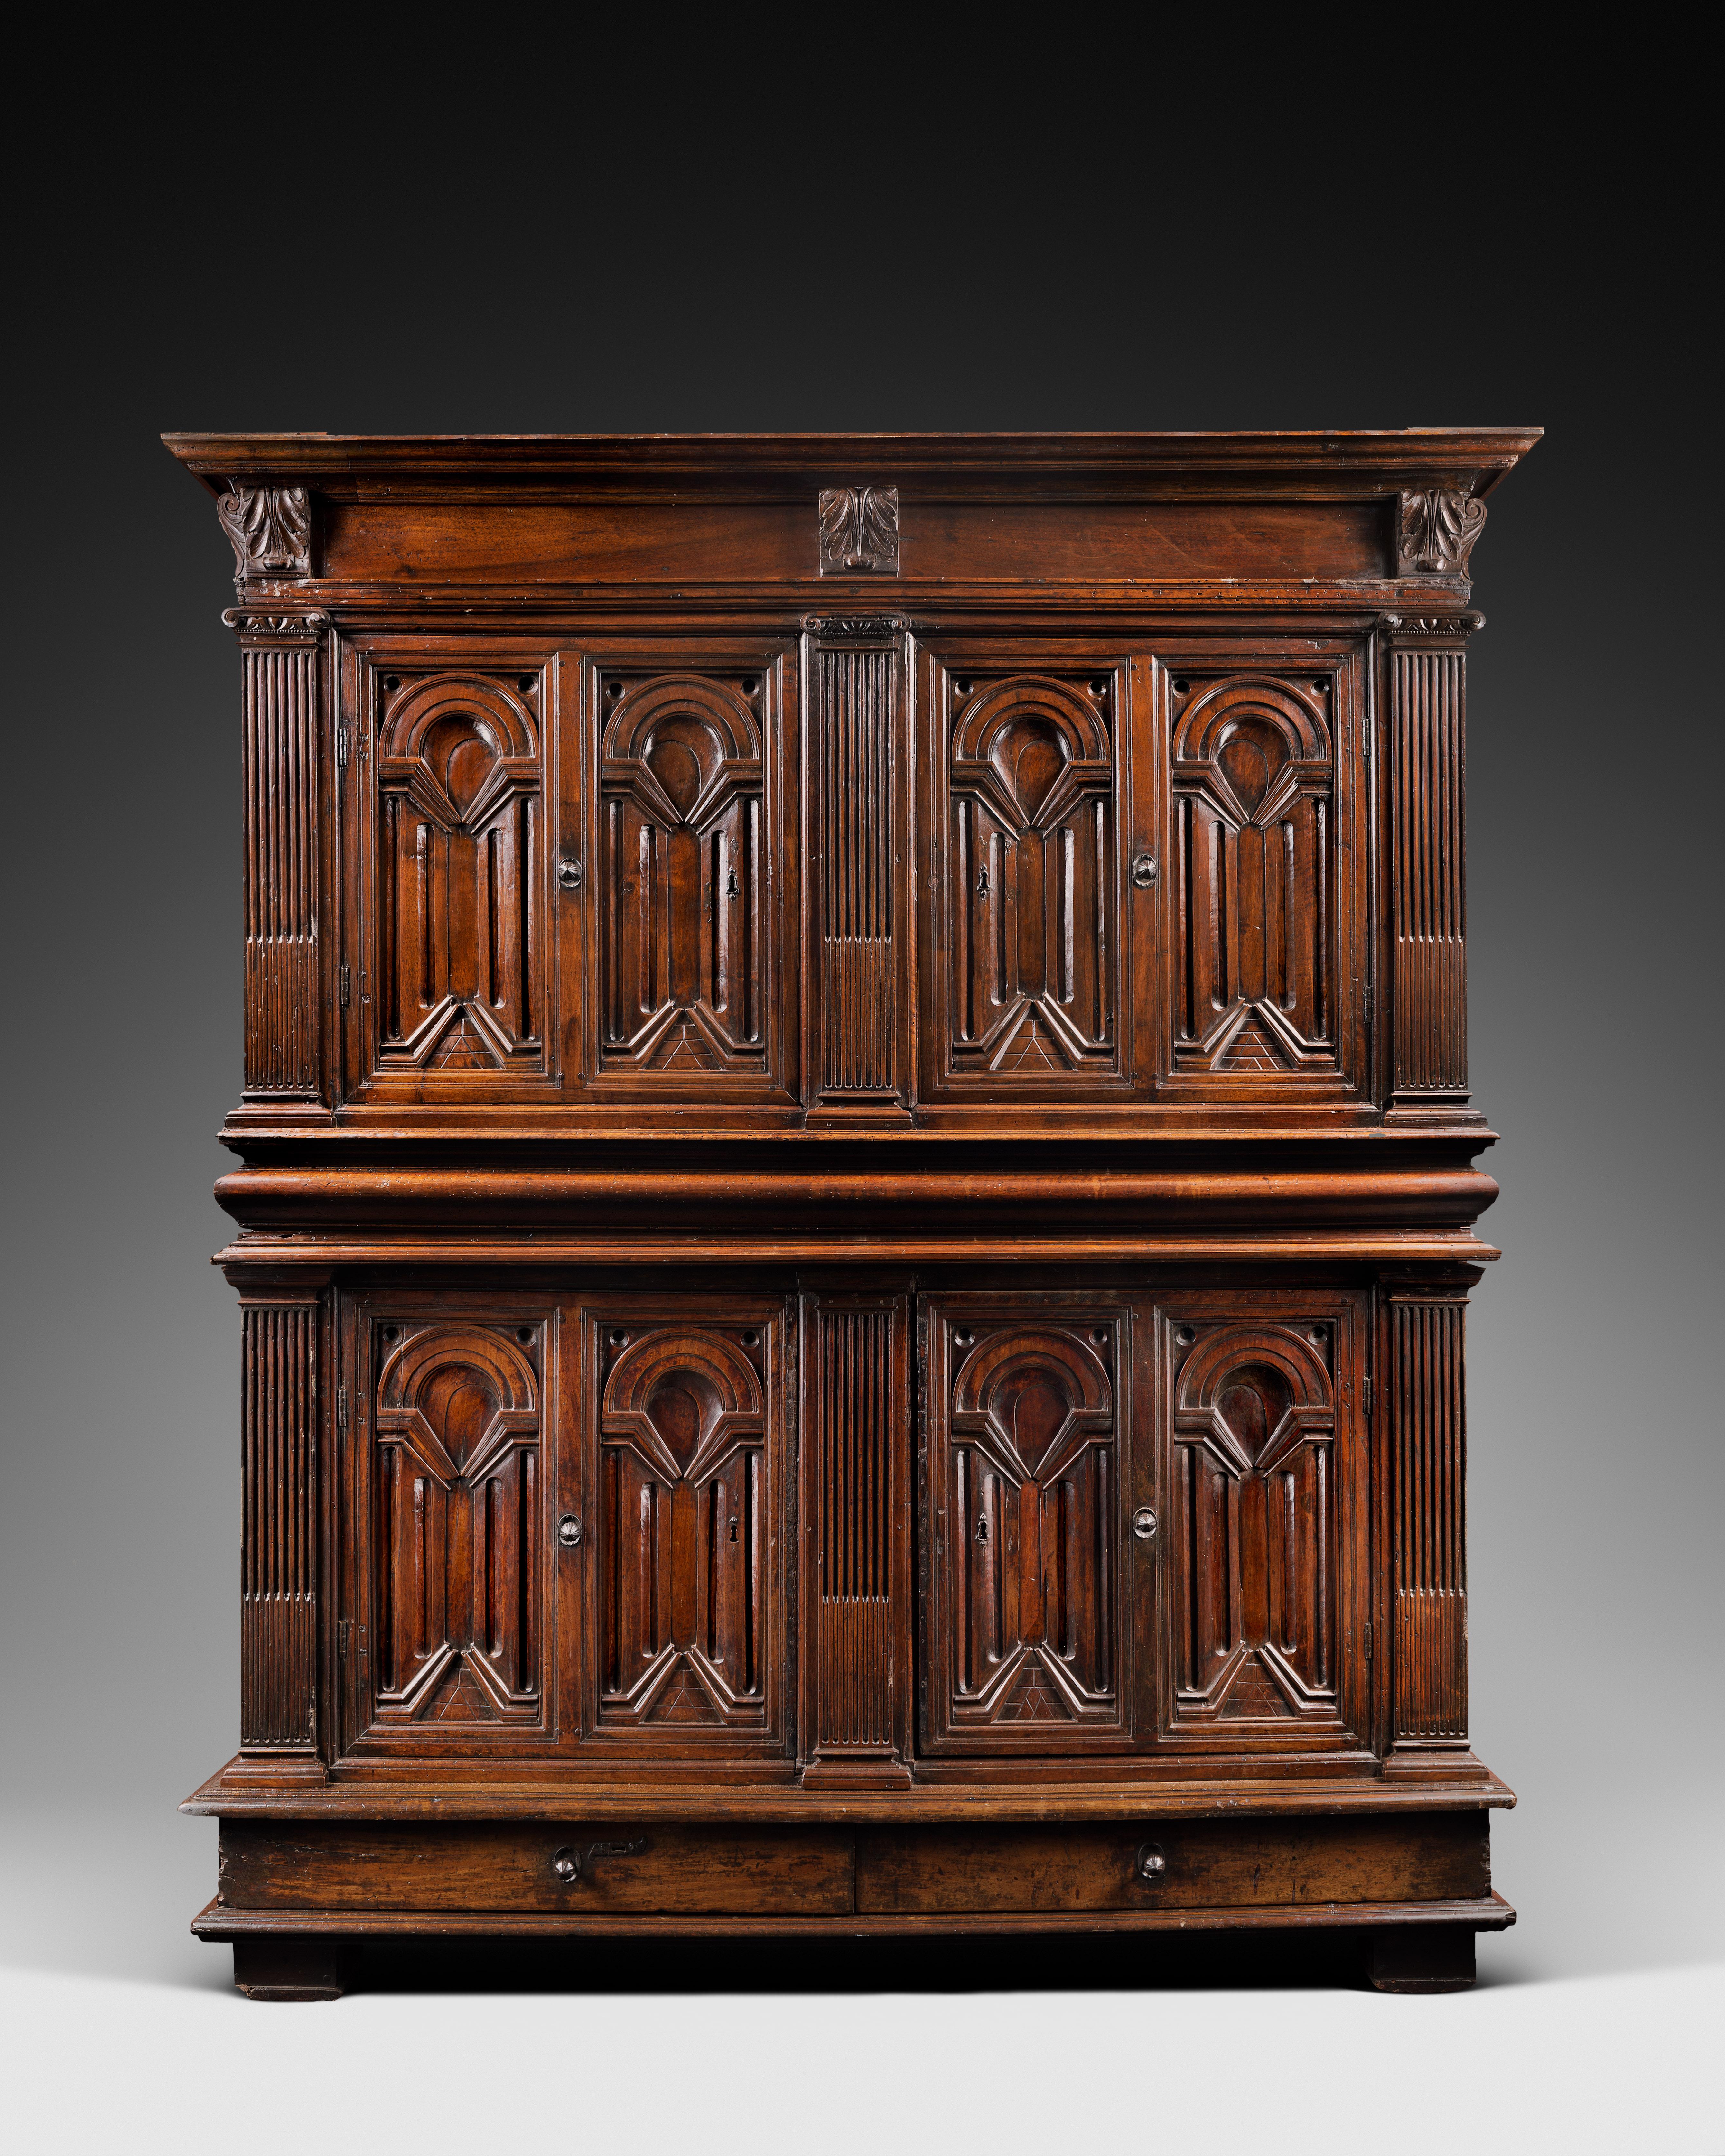 A rare carved walnut wardrobe opening with four door-leaves and two drawers in the lower part. The doors bear architectural views in low reliefs, fluted pilasters and Ionic capitals.

Upper Body
Two door-leaves with carved architectural